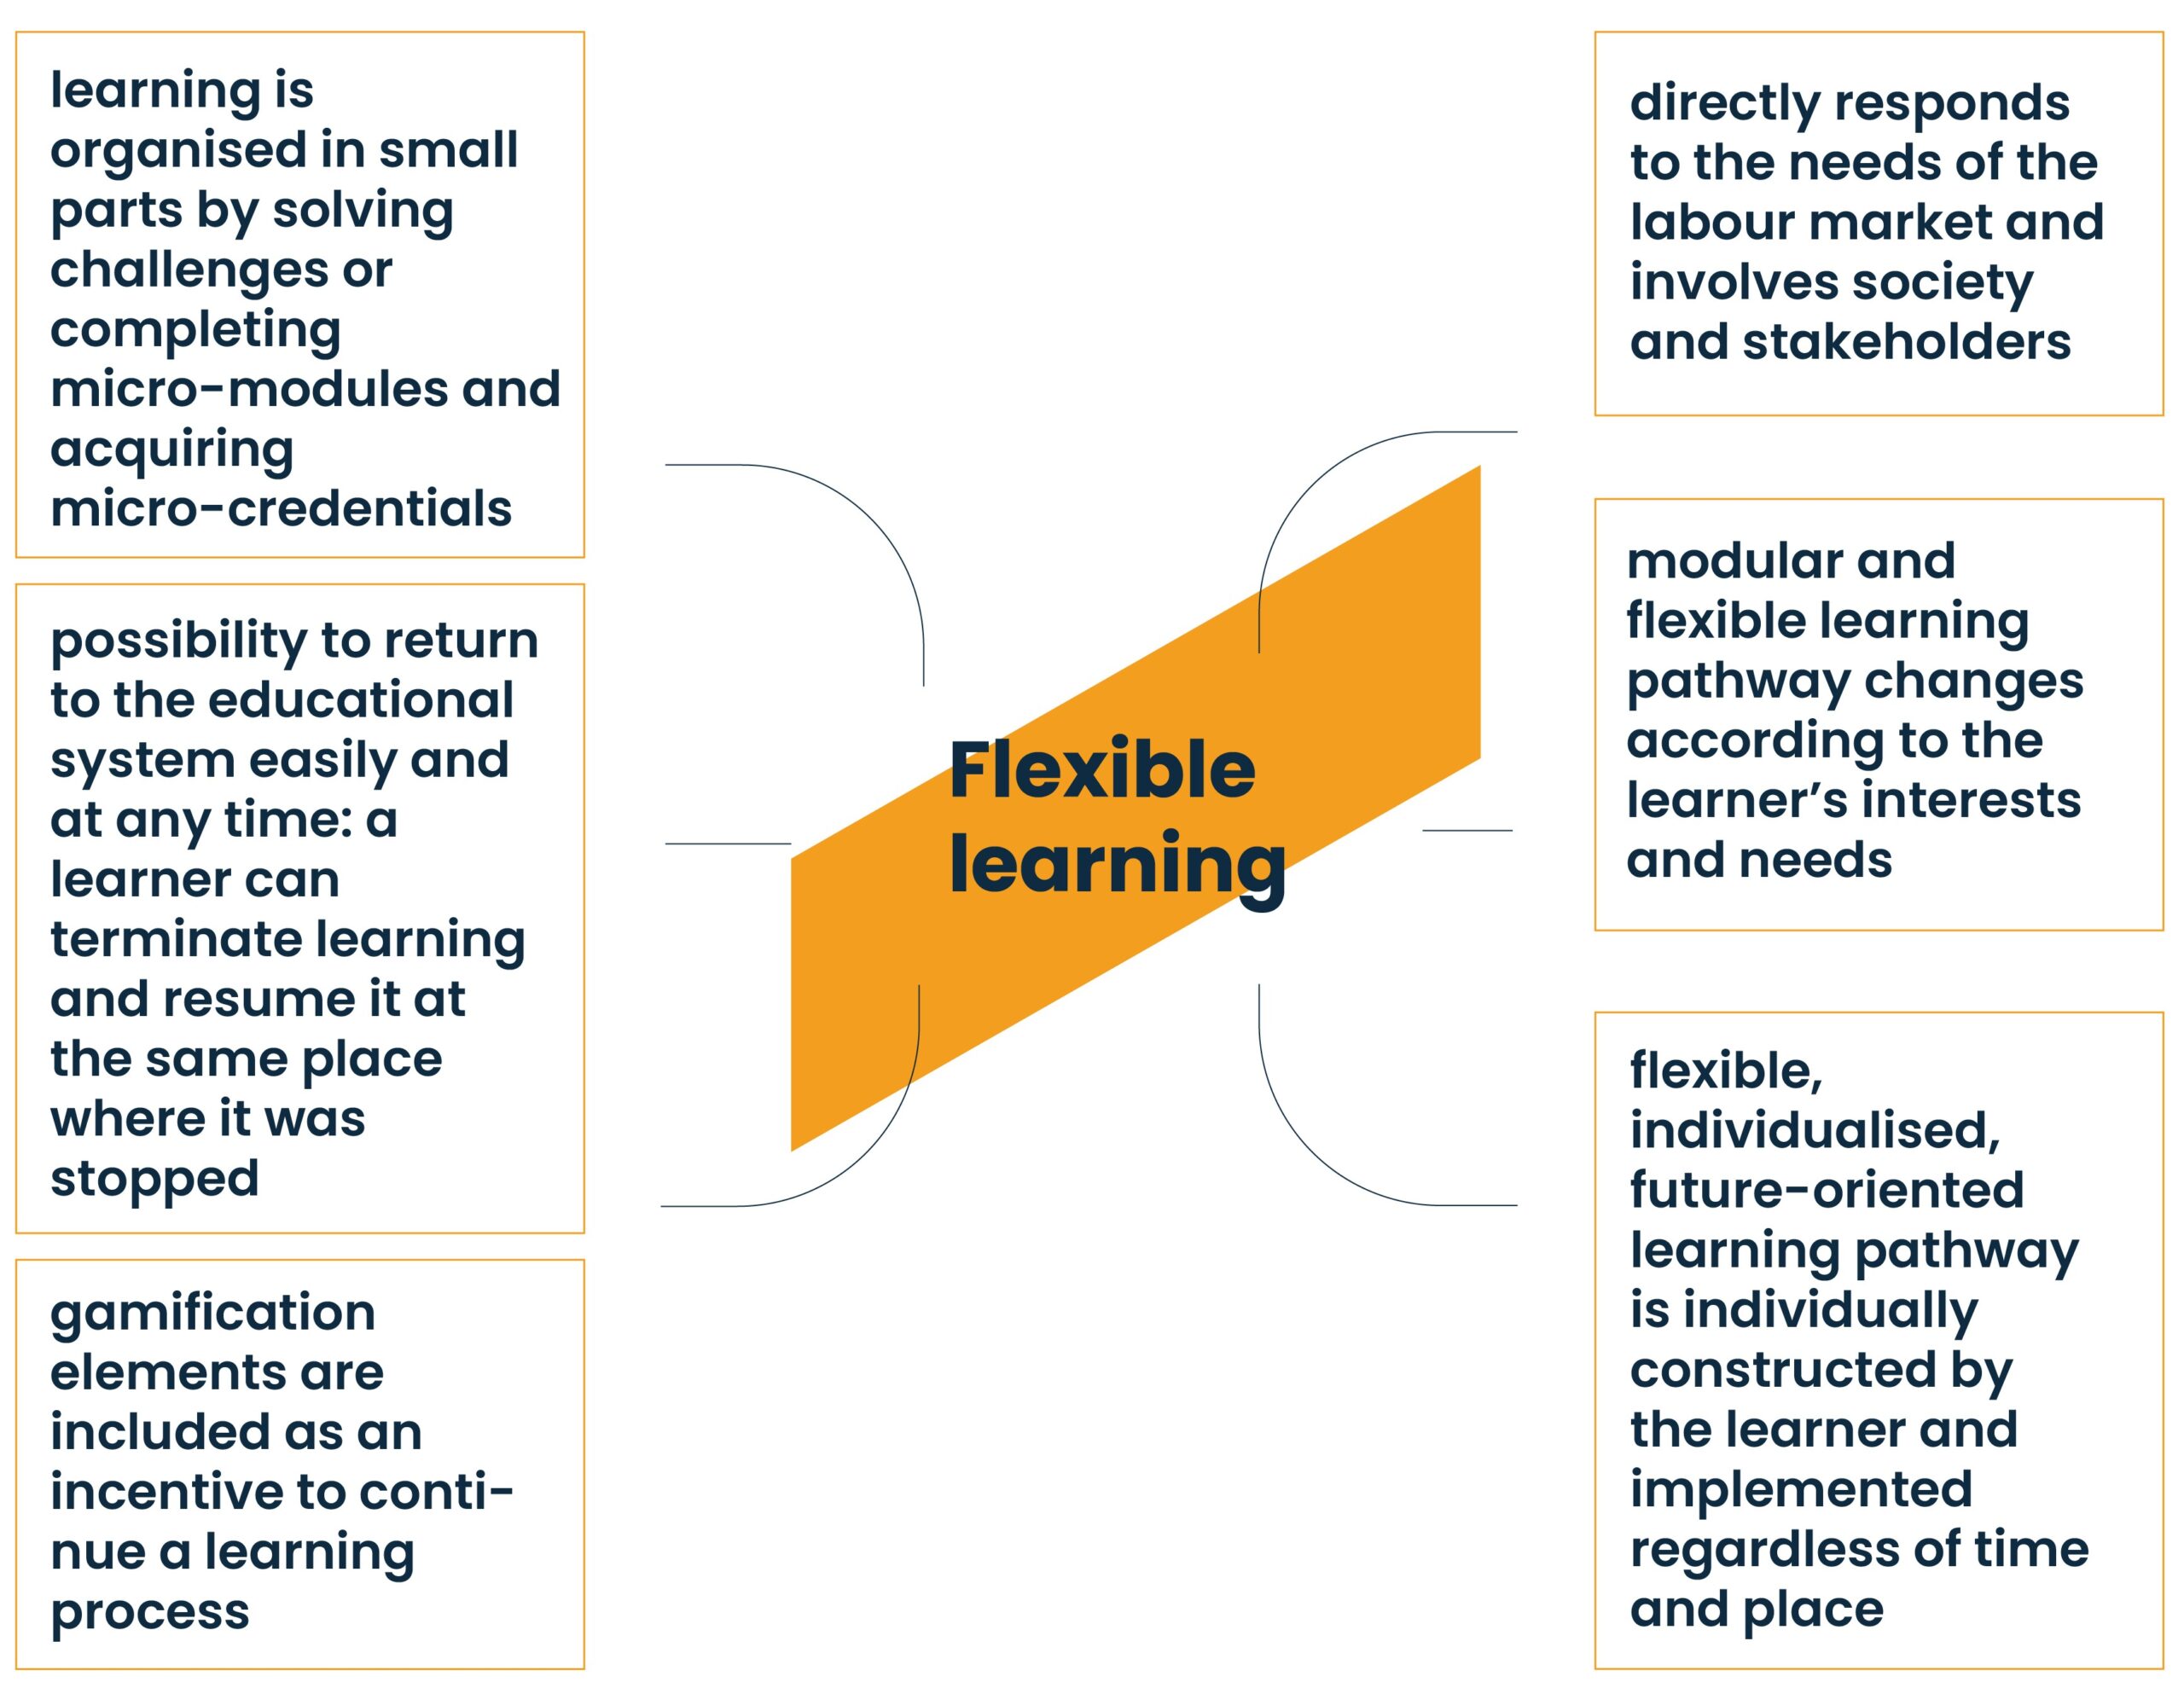 Image - Values of Flexible learning: • learning is organised in small parts by solving challenges or completing micro-modules and acquiring micro-credentials • possibility to return to the educational system easily and at any time: a learner can terminate learning and resume it at the same place where it was stopped • gamification elements are included as an incentive to continue a learning process • directly responds to the needs of the labour market and involves society and stakeholders • modular and flexible learning pathway changes according to the learner’s interests and needs • flexible, individualised, future-oriented learning pathway is individually constructed by the learner and implemented regardless of time and place